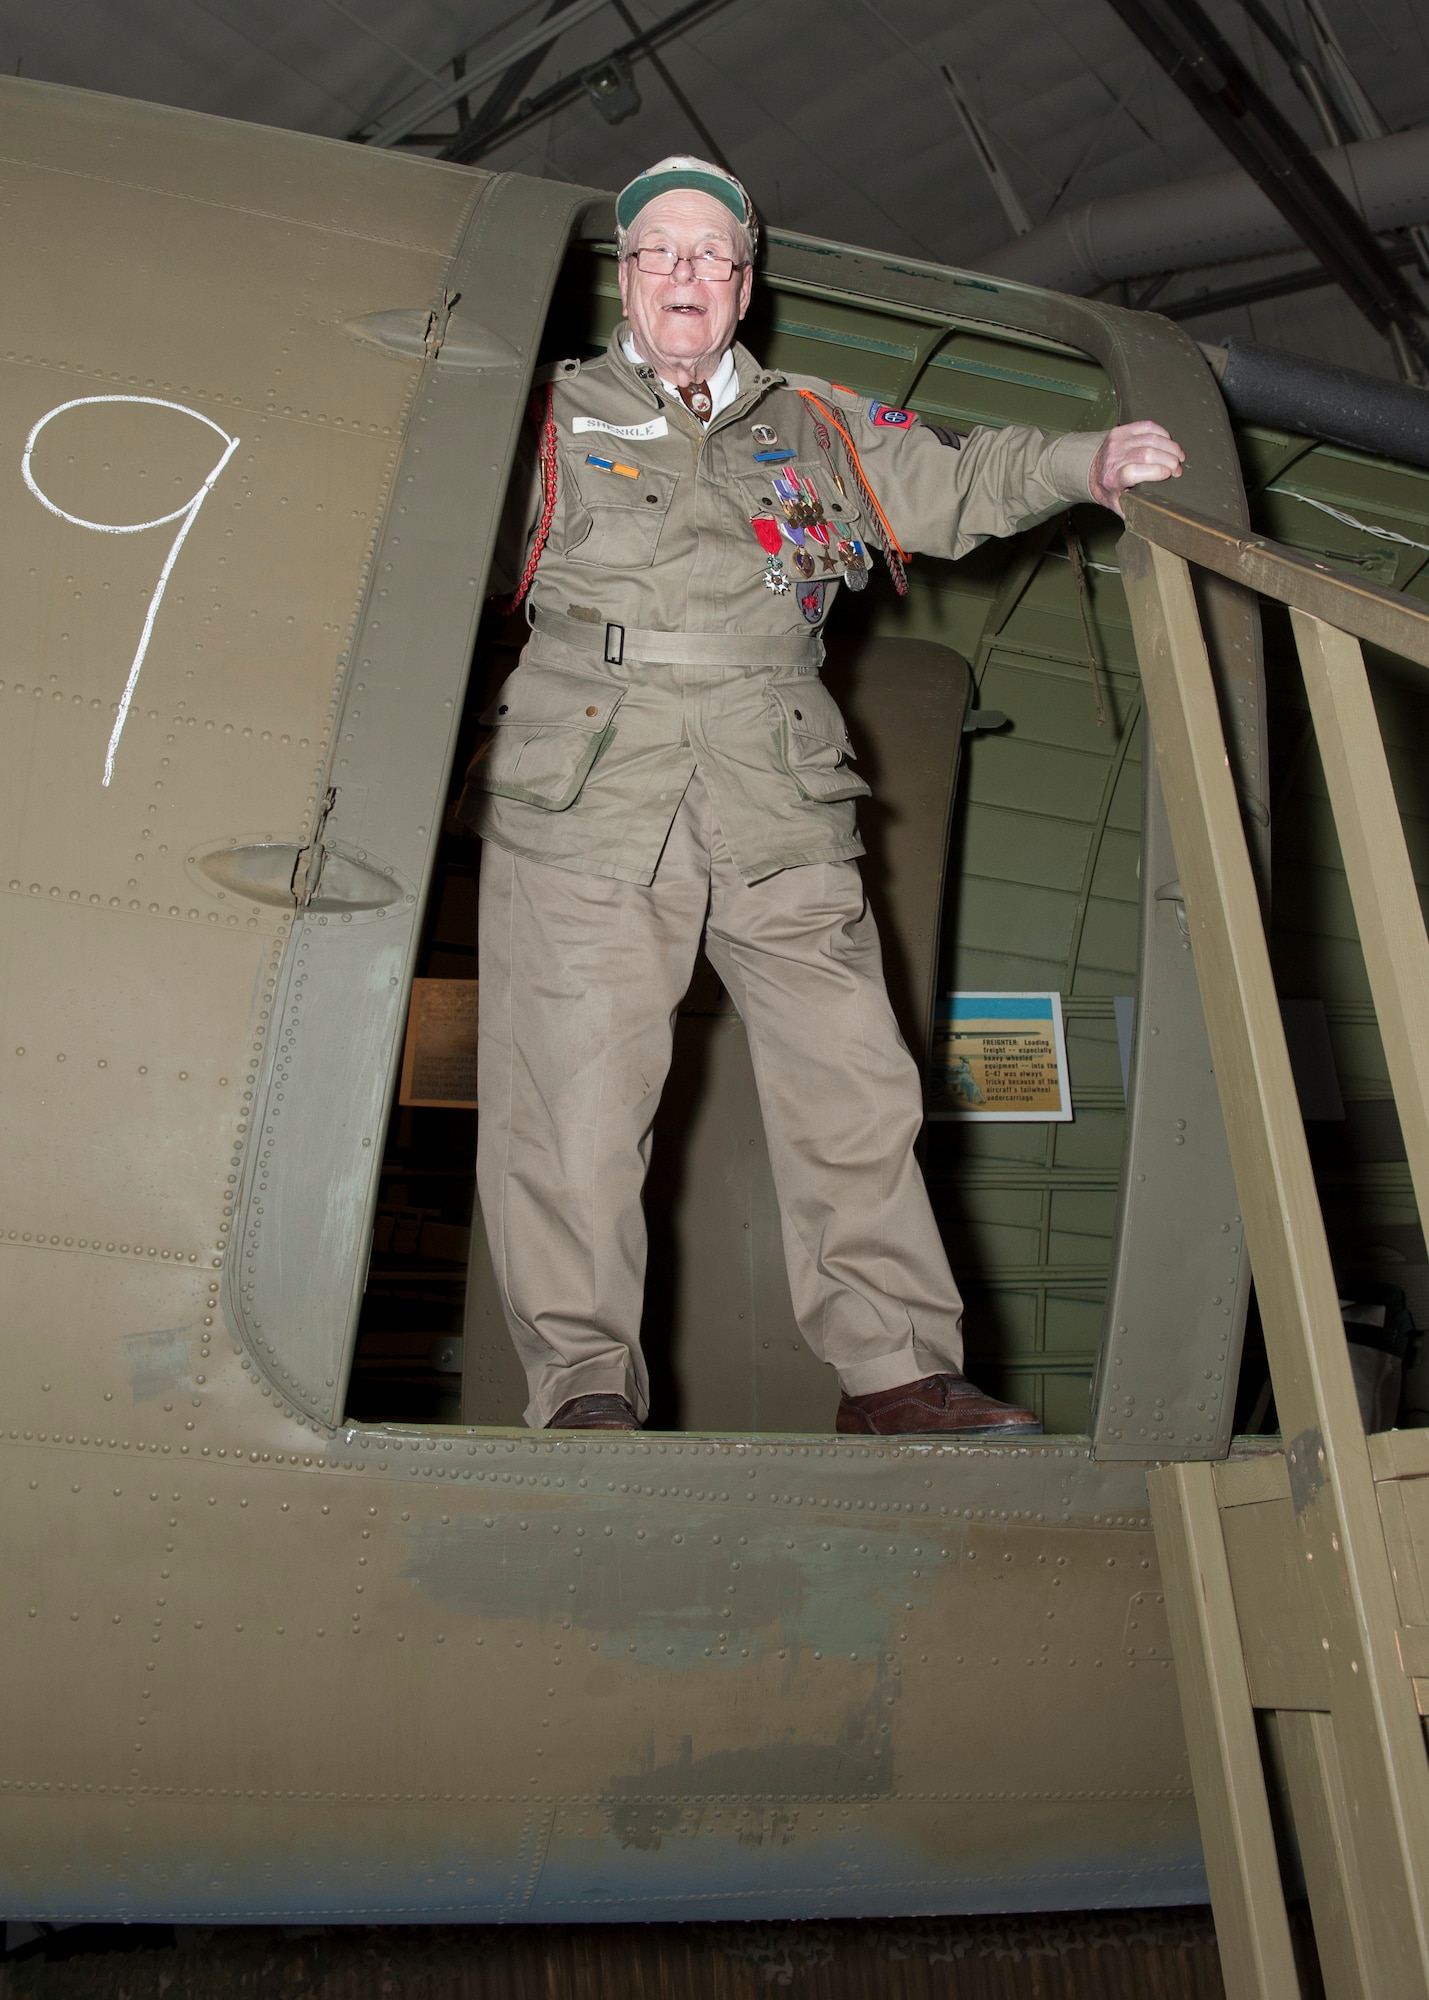 George Shenkle stands in the troop doorway of a C-47A Skytrain April 18, 2015, at the Air Mobility Command Museum near Dover Air Force Base, Del. Shenkle jumped out of this exact door on D-Day, June 6, 1944, over Sainte-Mère-Église, France. (U.S. Air Force photo/Airman 1st Class Zachary Cacicia) 